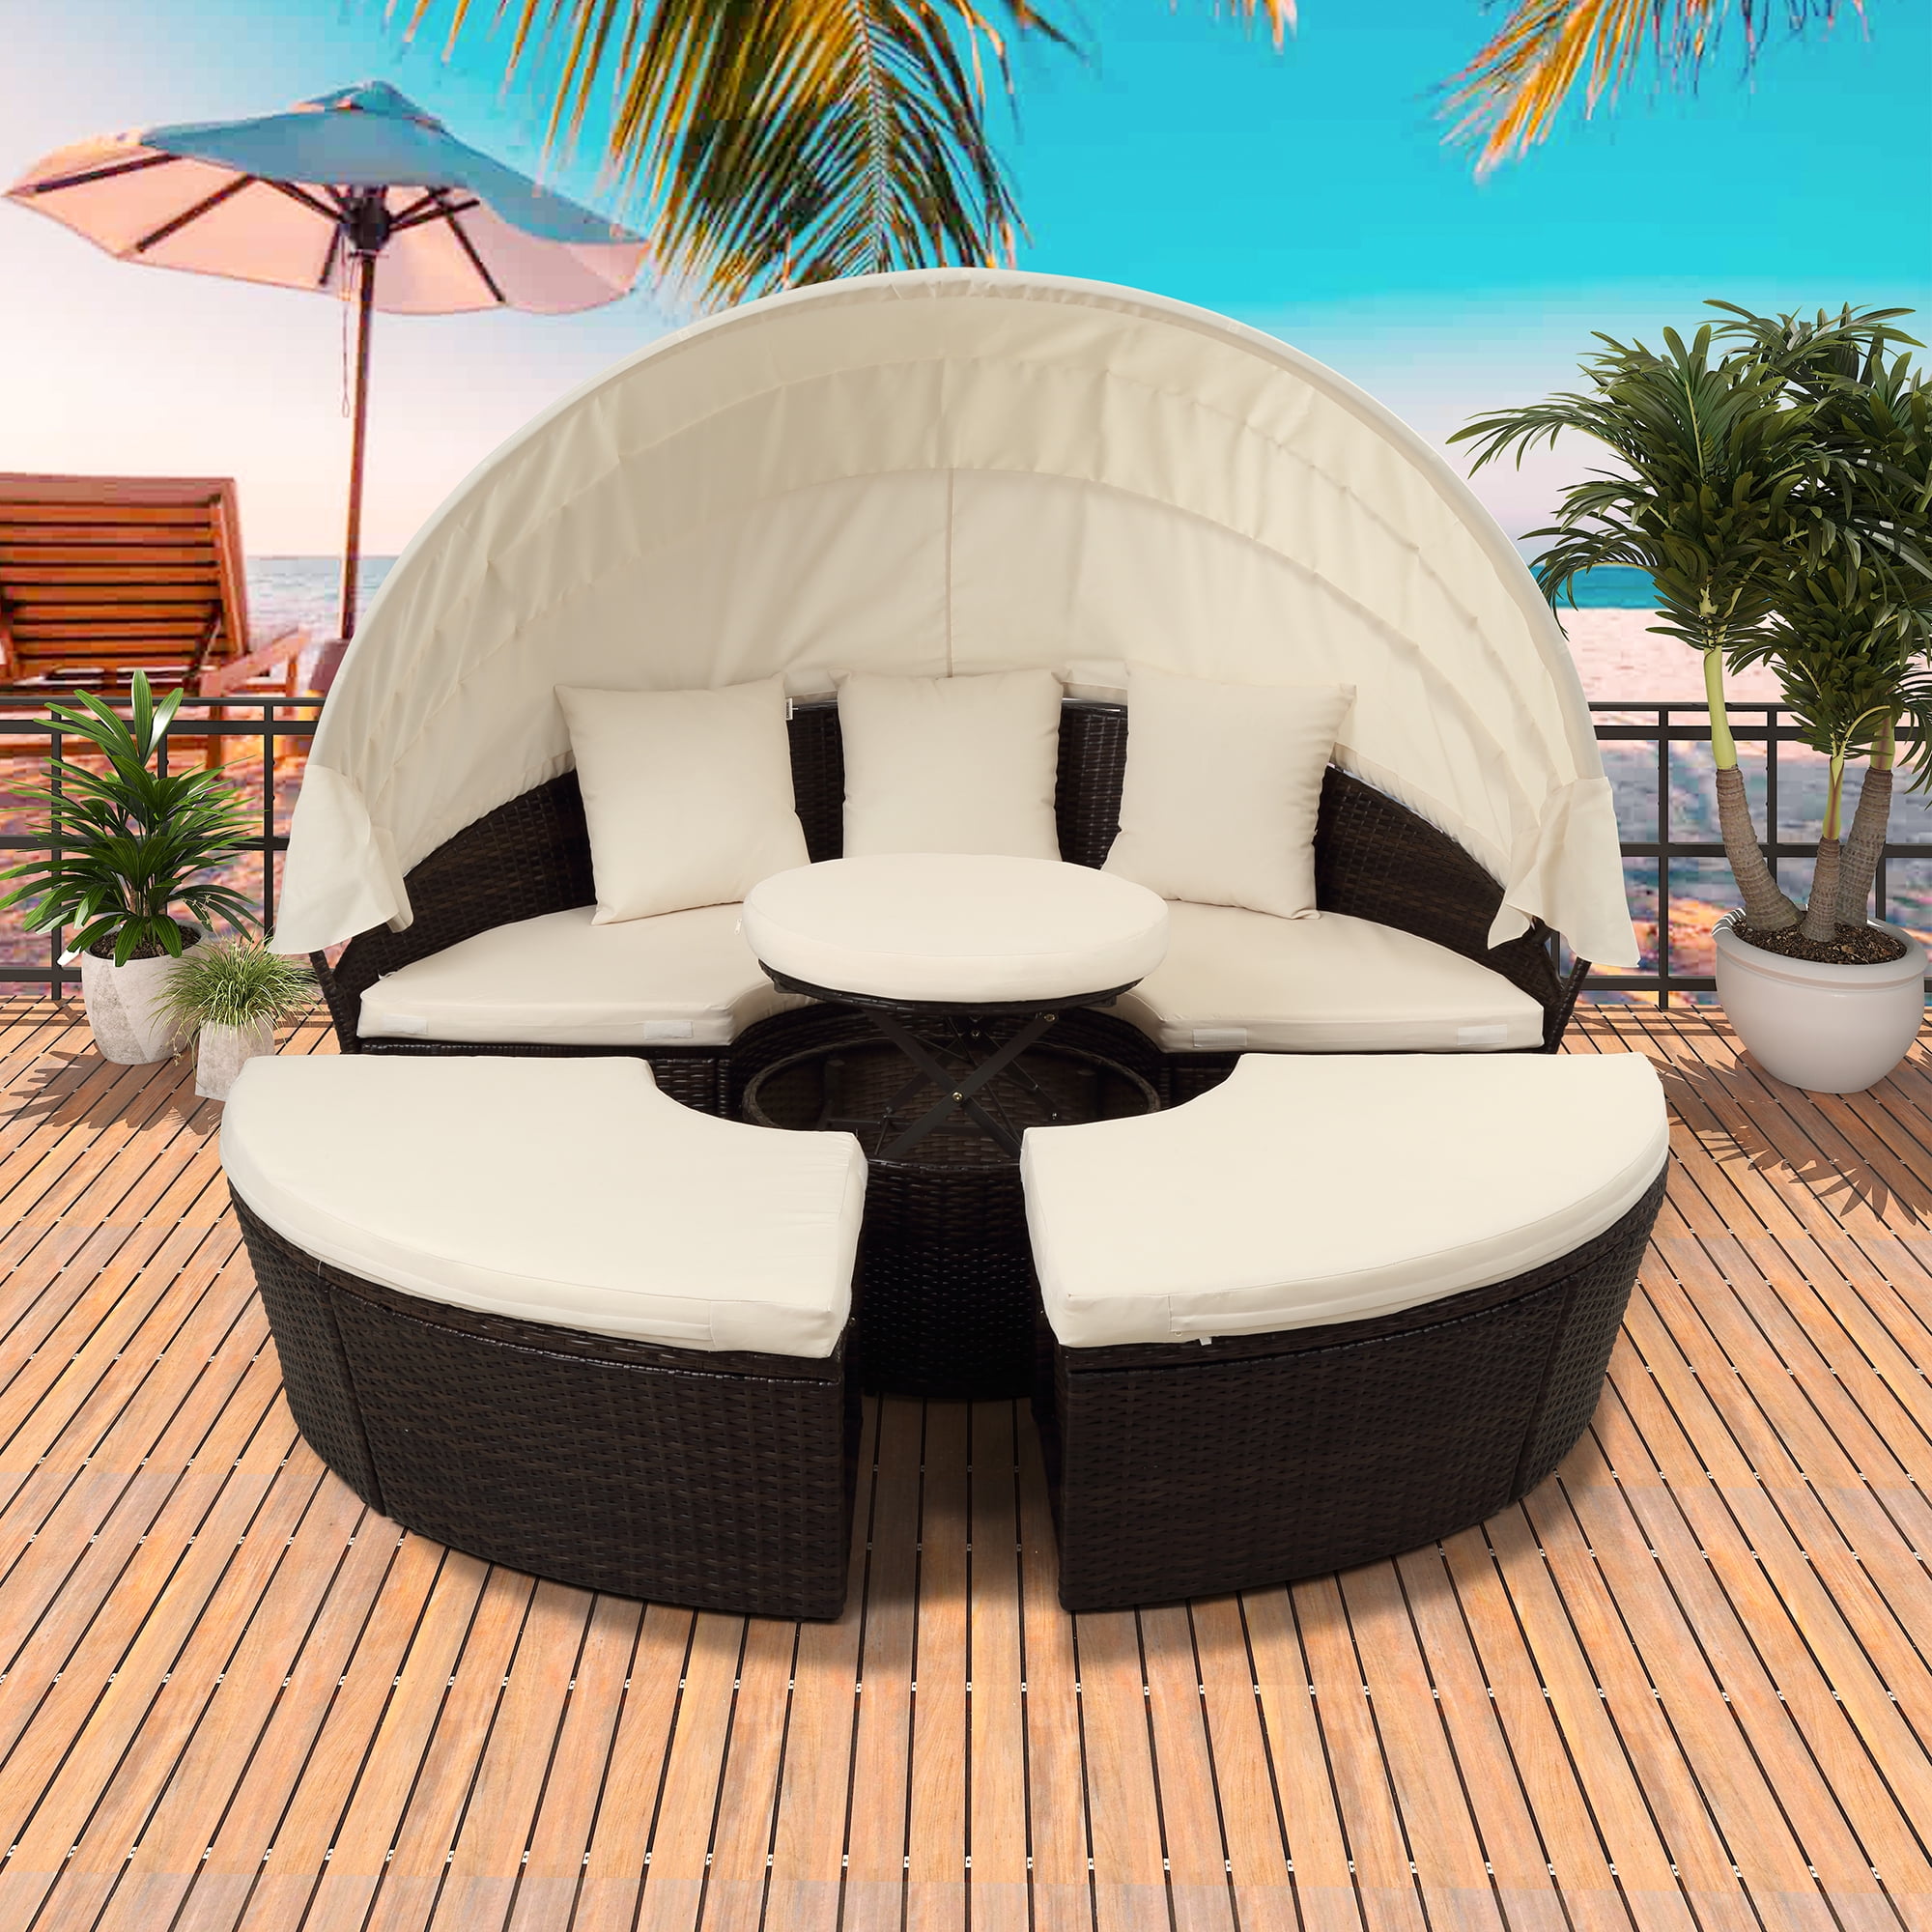 Seating Separates Cushioned Seats Outdoor Sectional Patio Sofa Set,Patio Furniture Outdoor Lawn Backyard Poolside Garden Round Daybed with Retractable Canopy Wicker Rattan